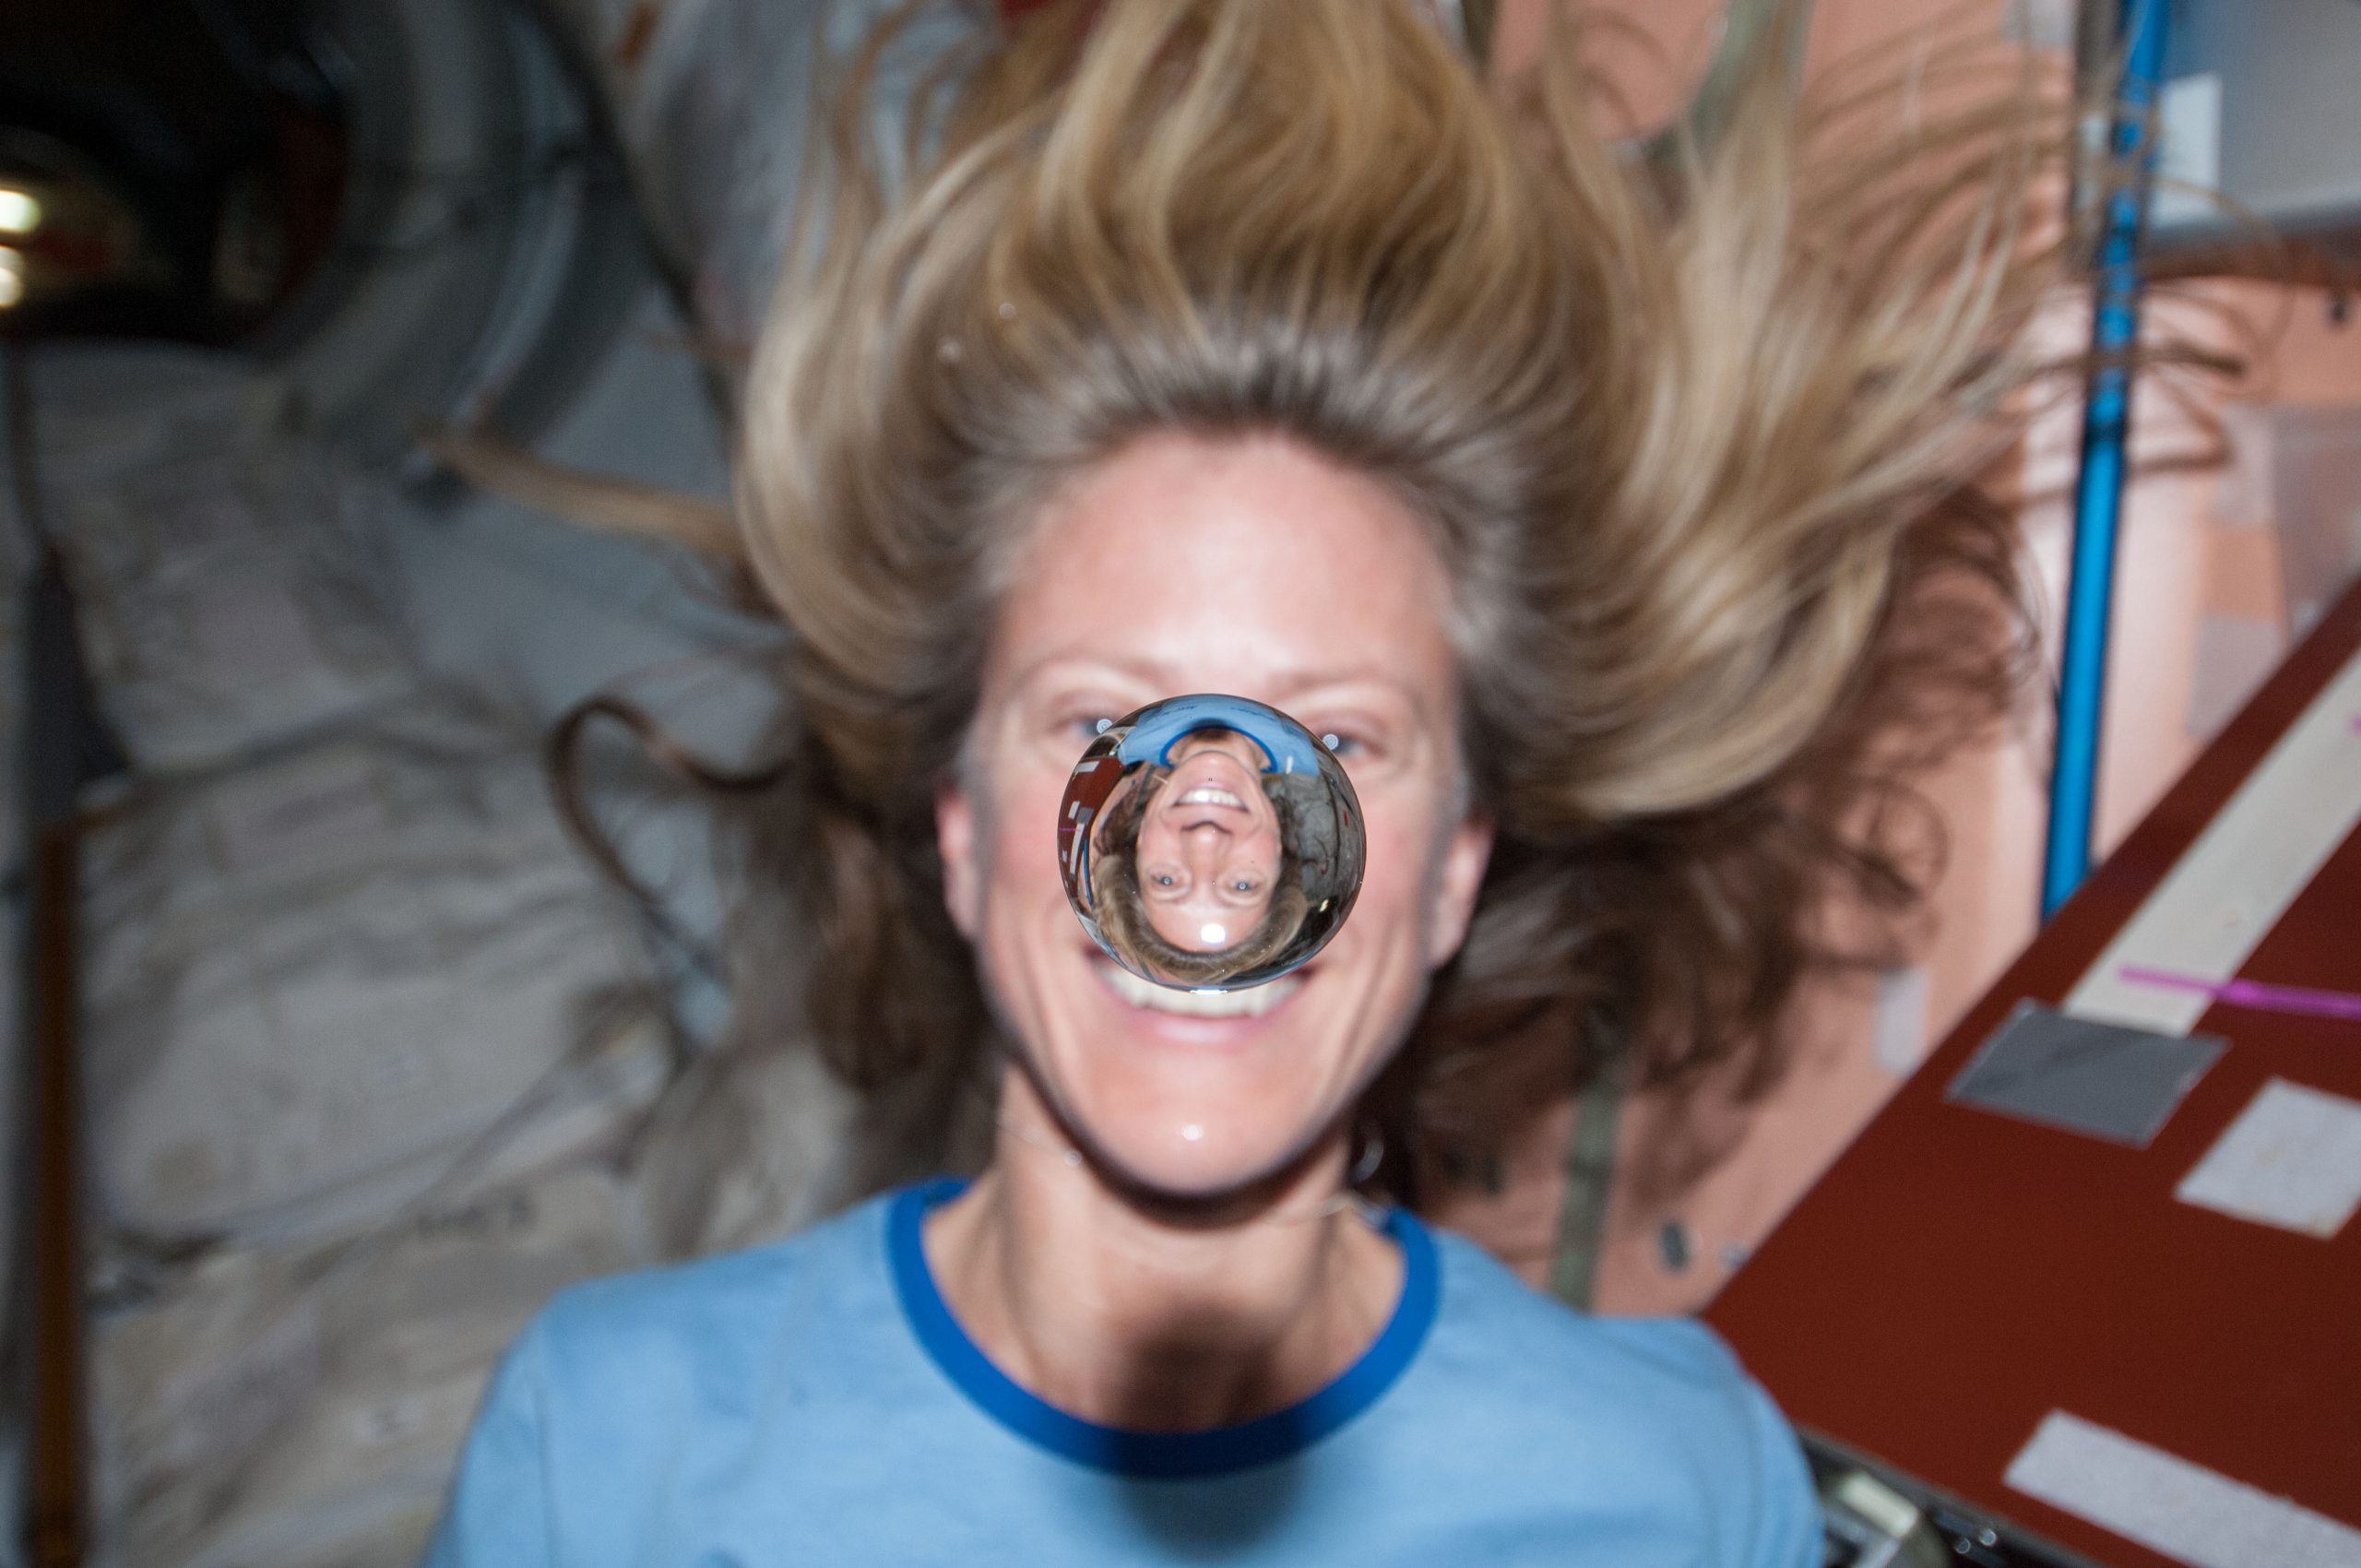 Astronaut karen nyberg watches a water bubble float freely between her and the camera, showing her image refracted in the droplet.